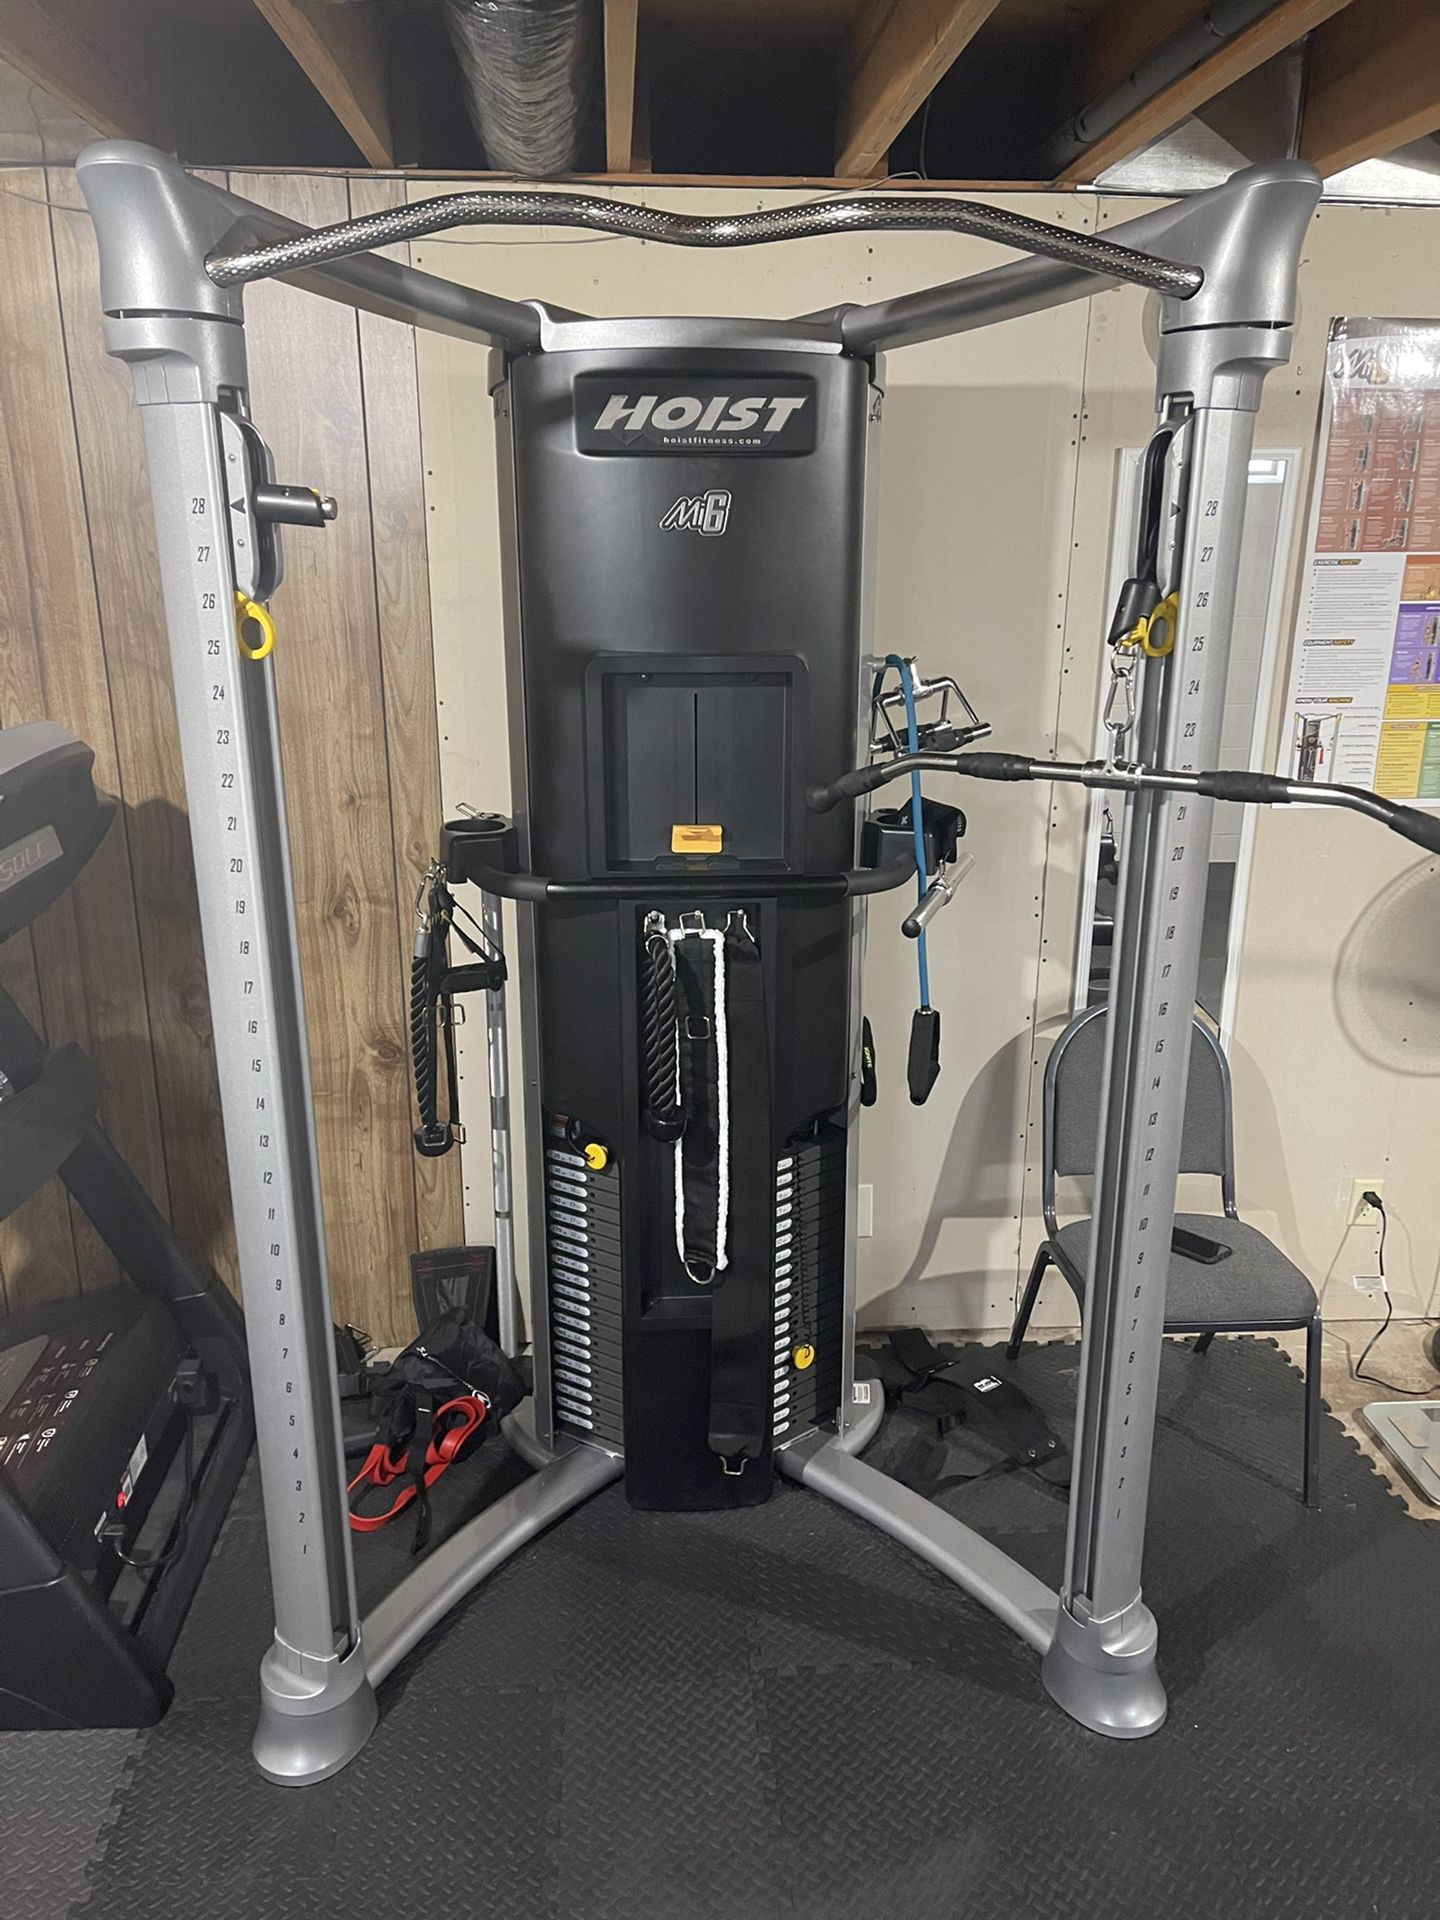 Complete Home Gym Like New